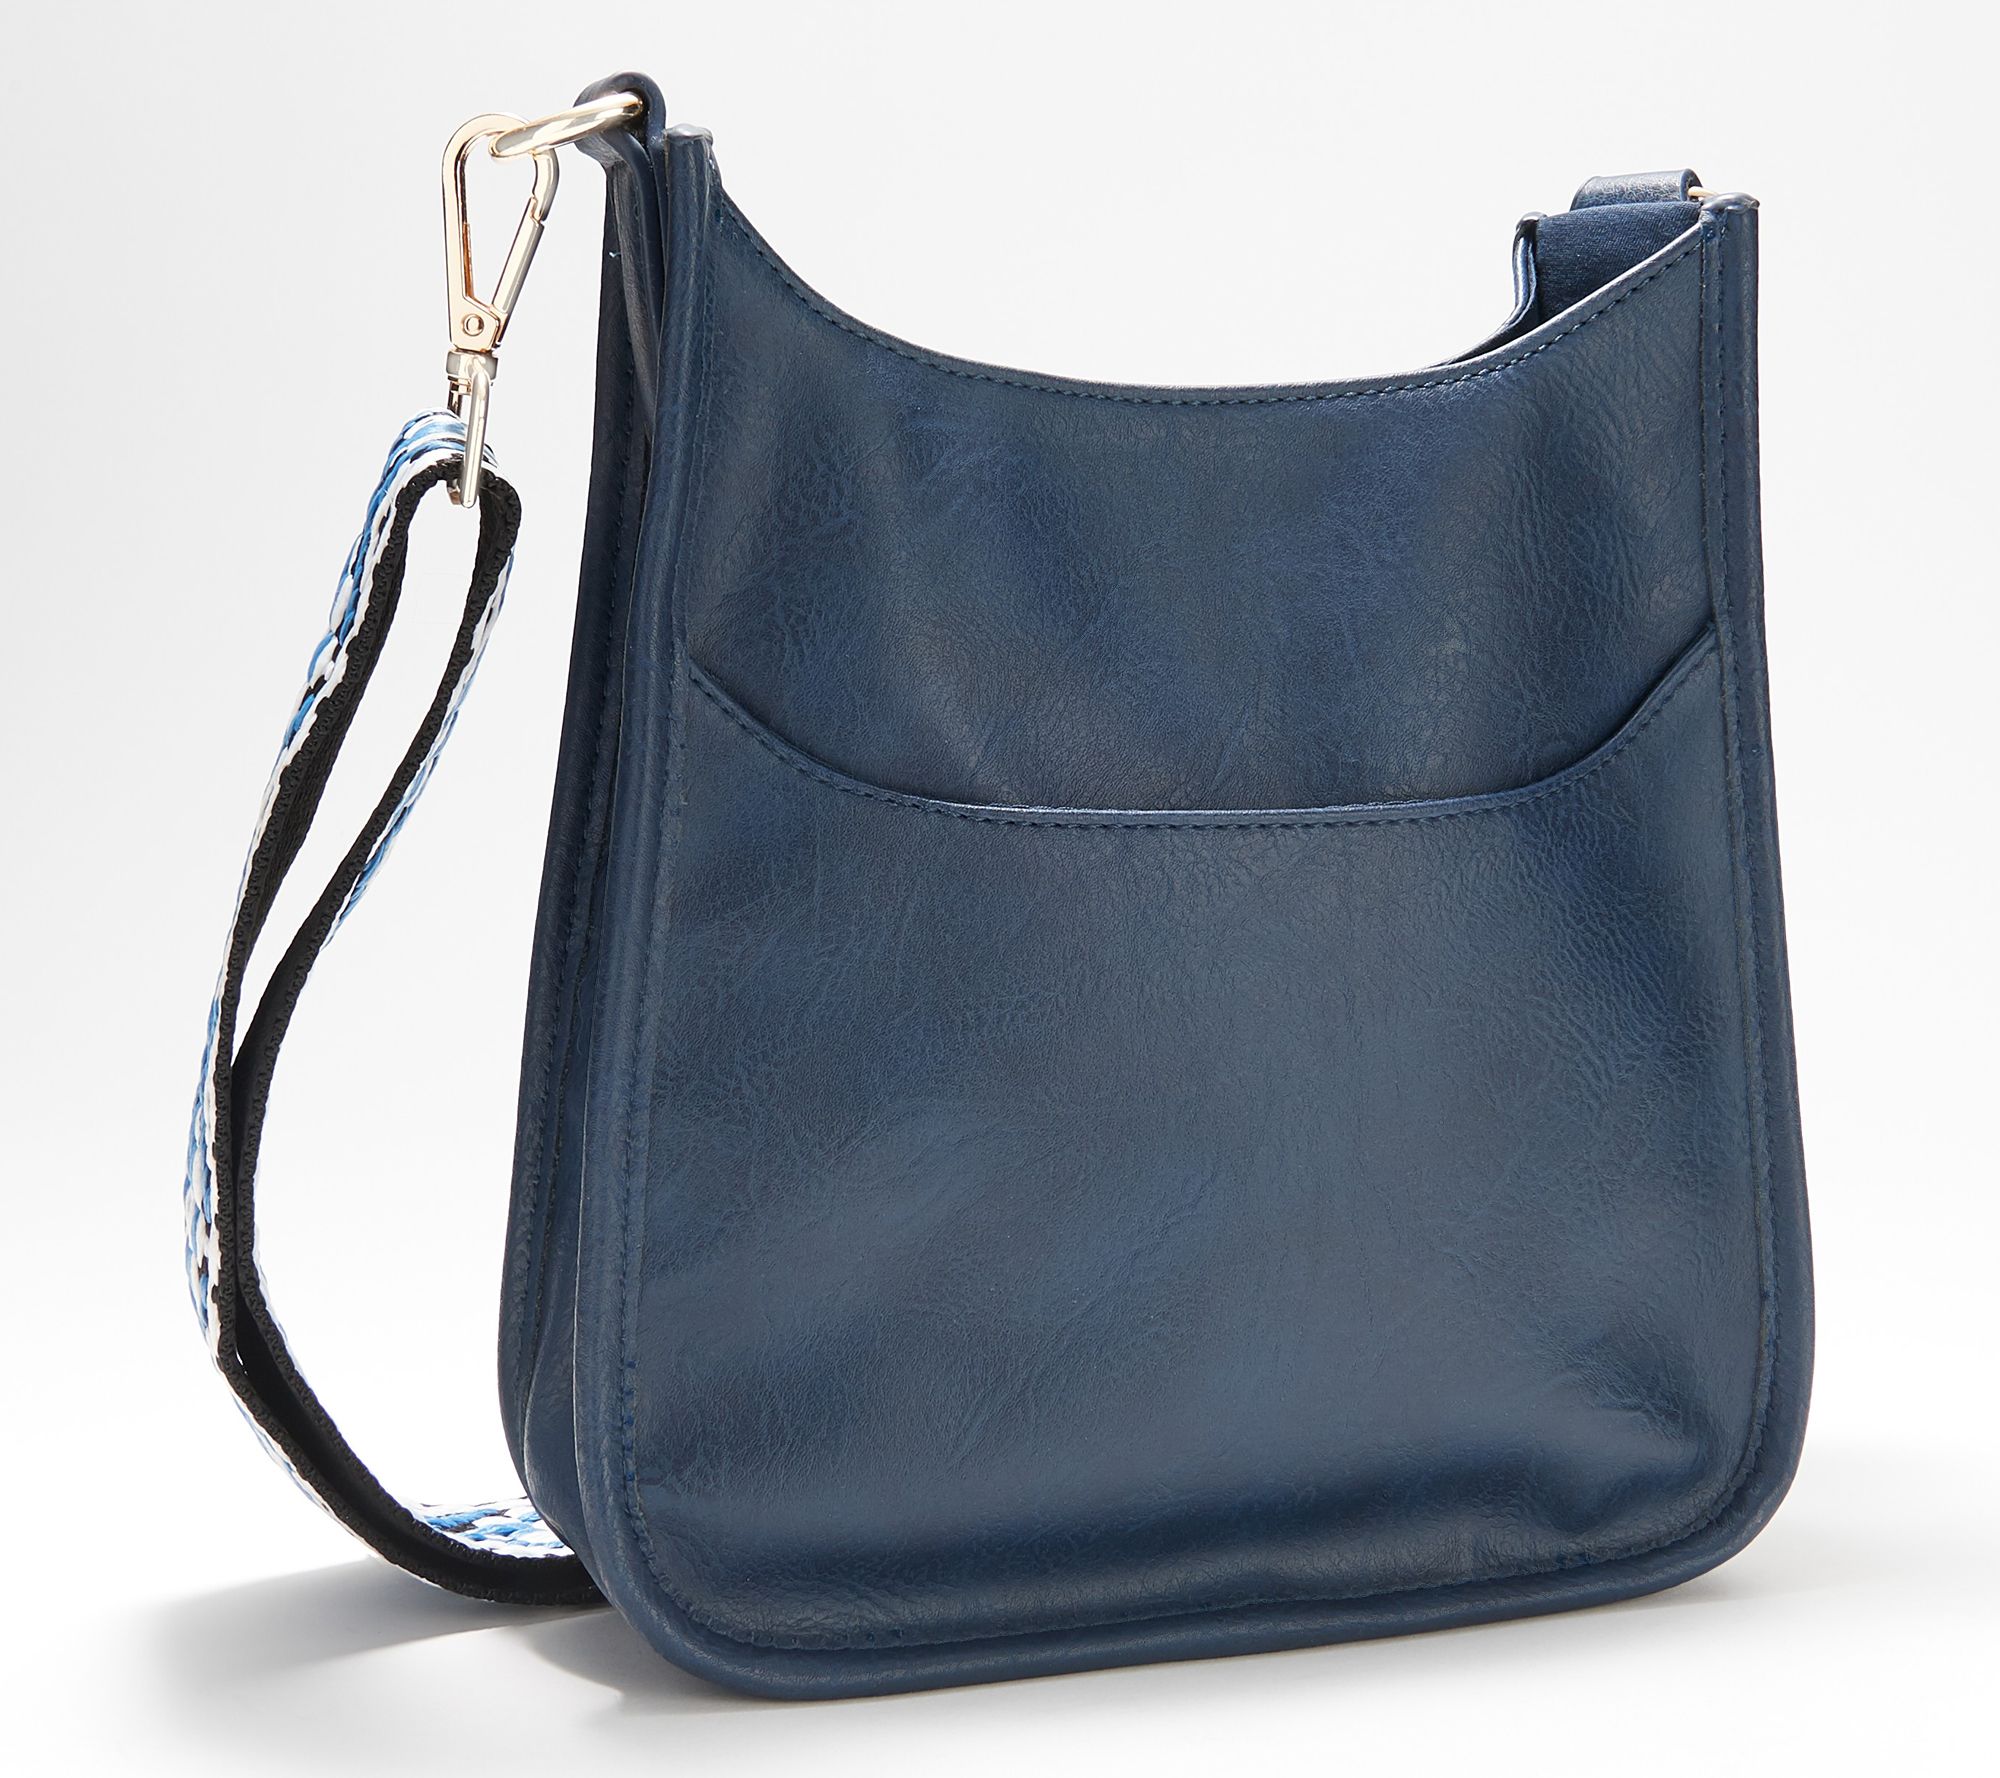 Ahdorned Medium Faux Leather Crossbody with Extra Strap Navy